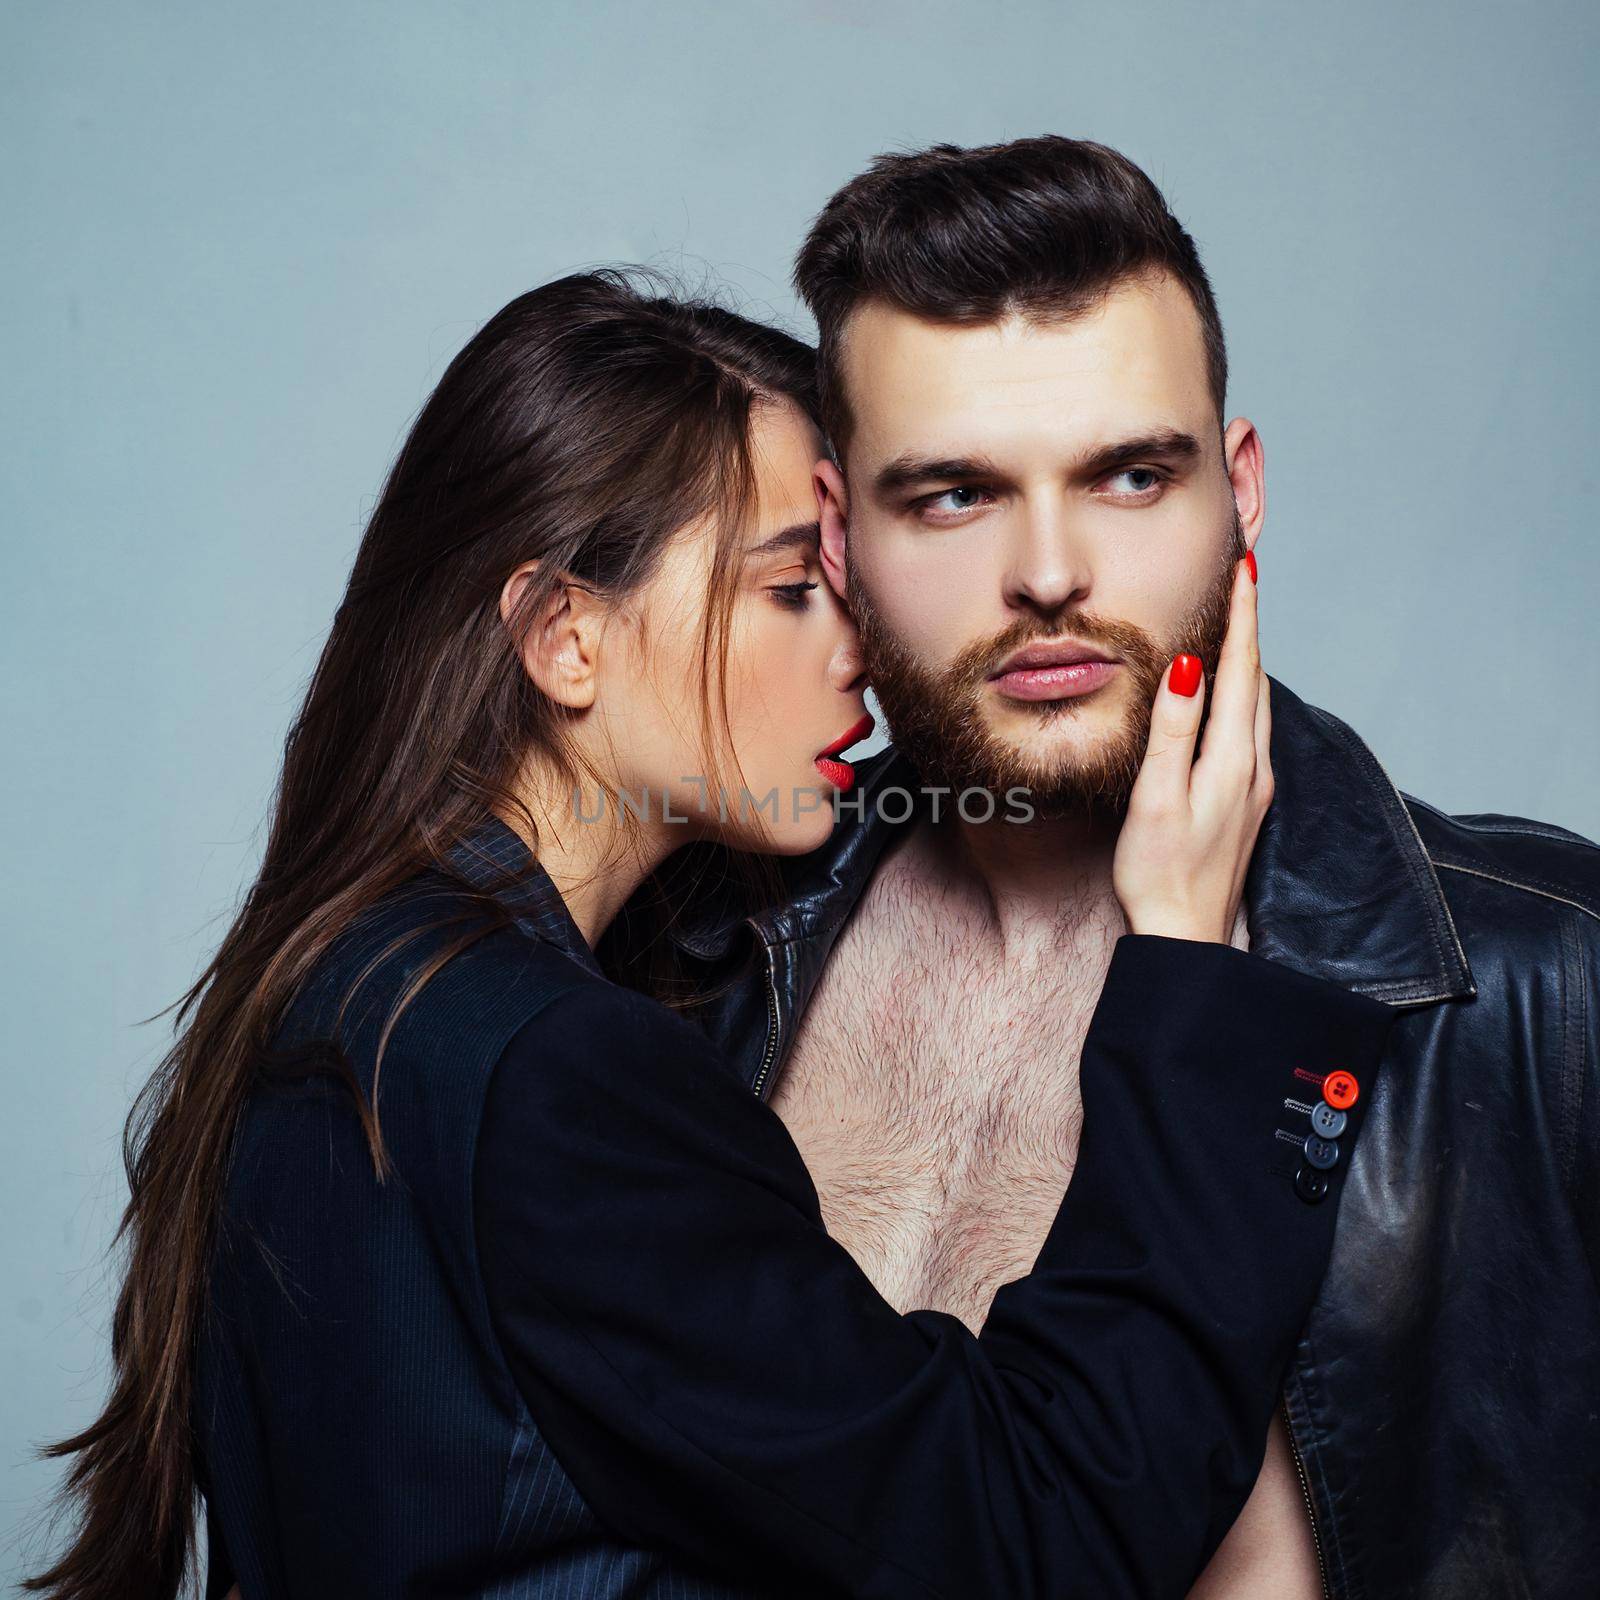 Girlfriend passionate red lips and man leather jacket. Passionate hug. Couple passionate people in love. Passion fashion. Man brutal well groomed macho and attractive feminine girl long hair cuddling.